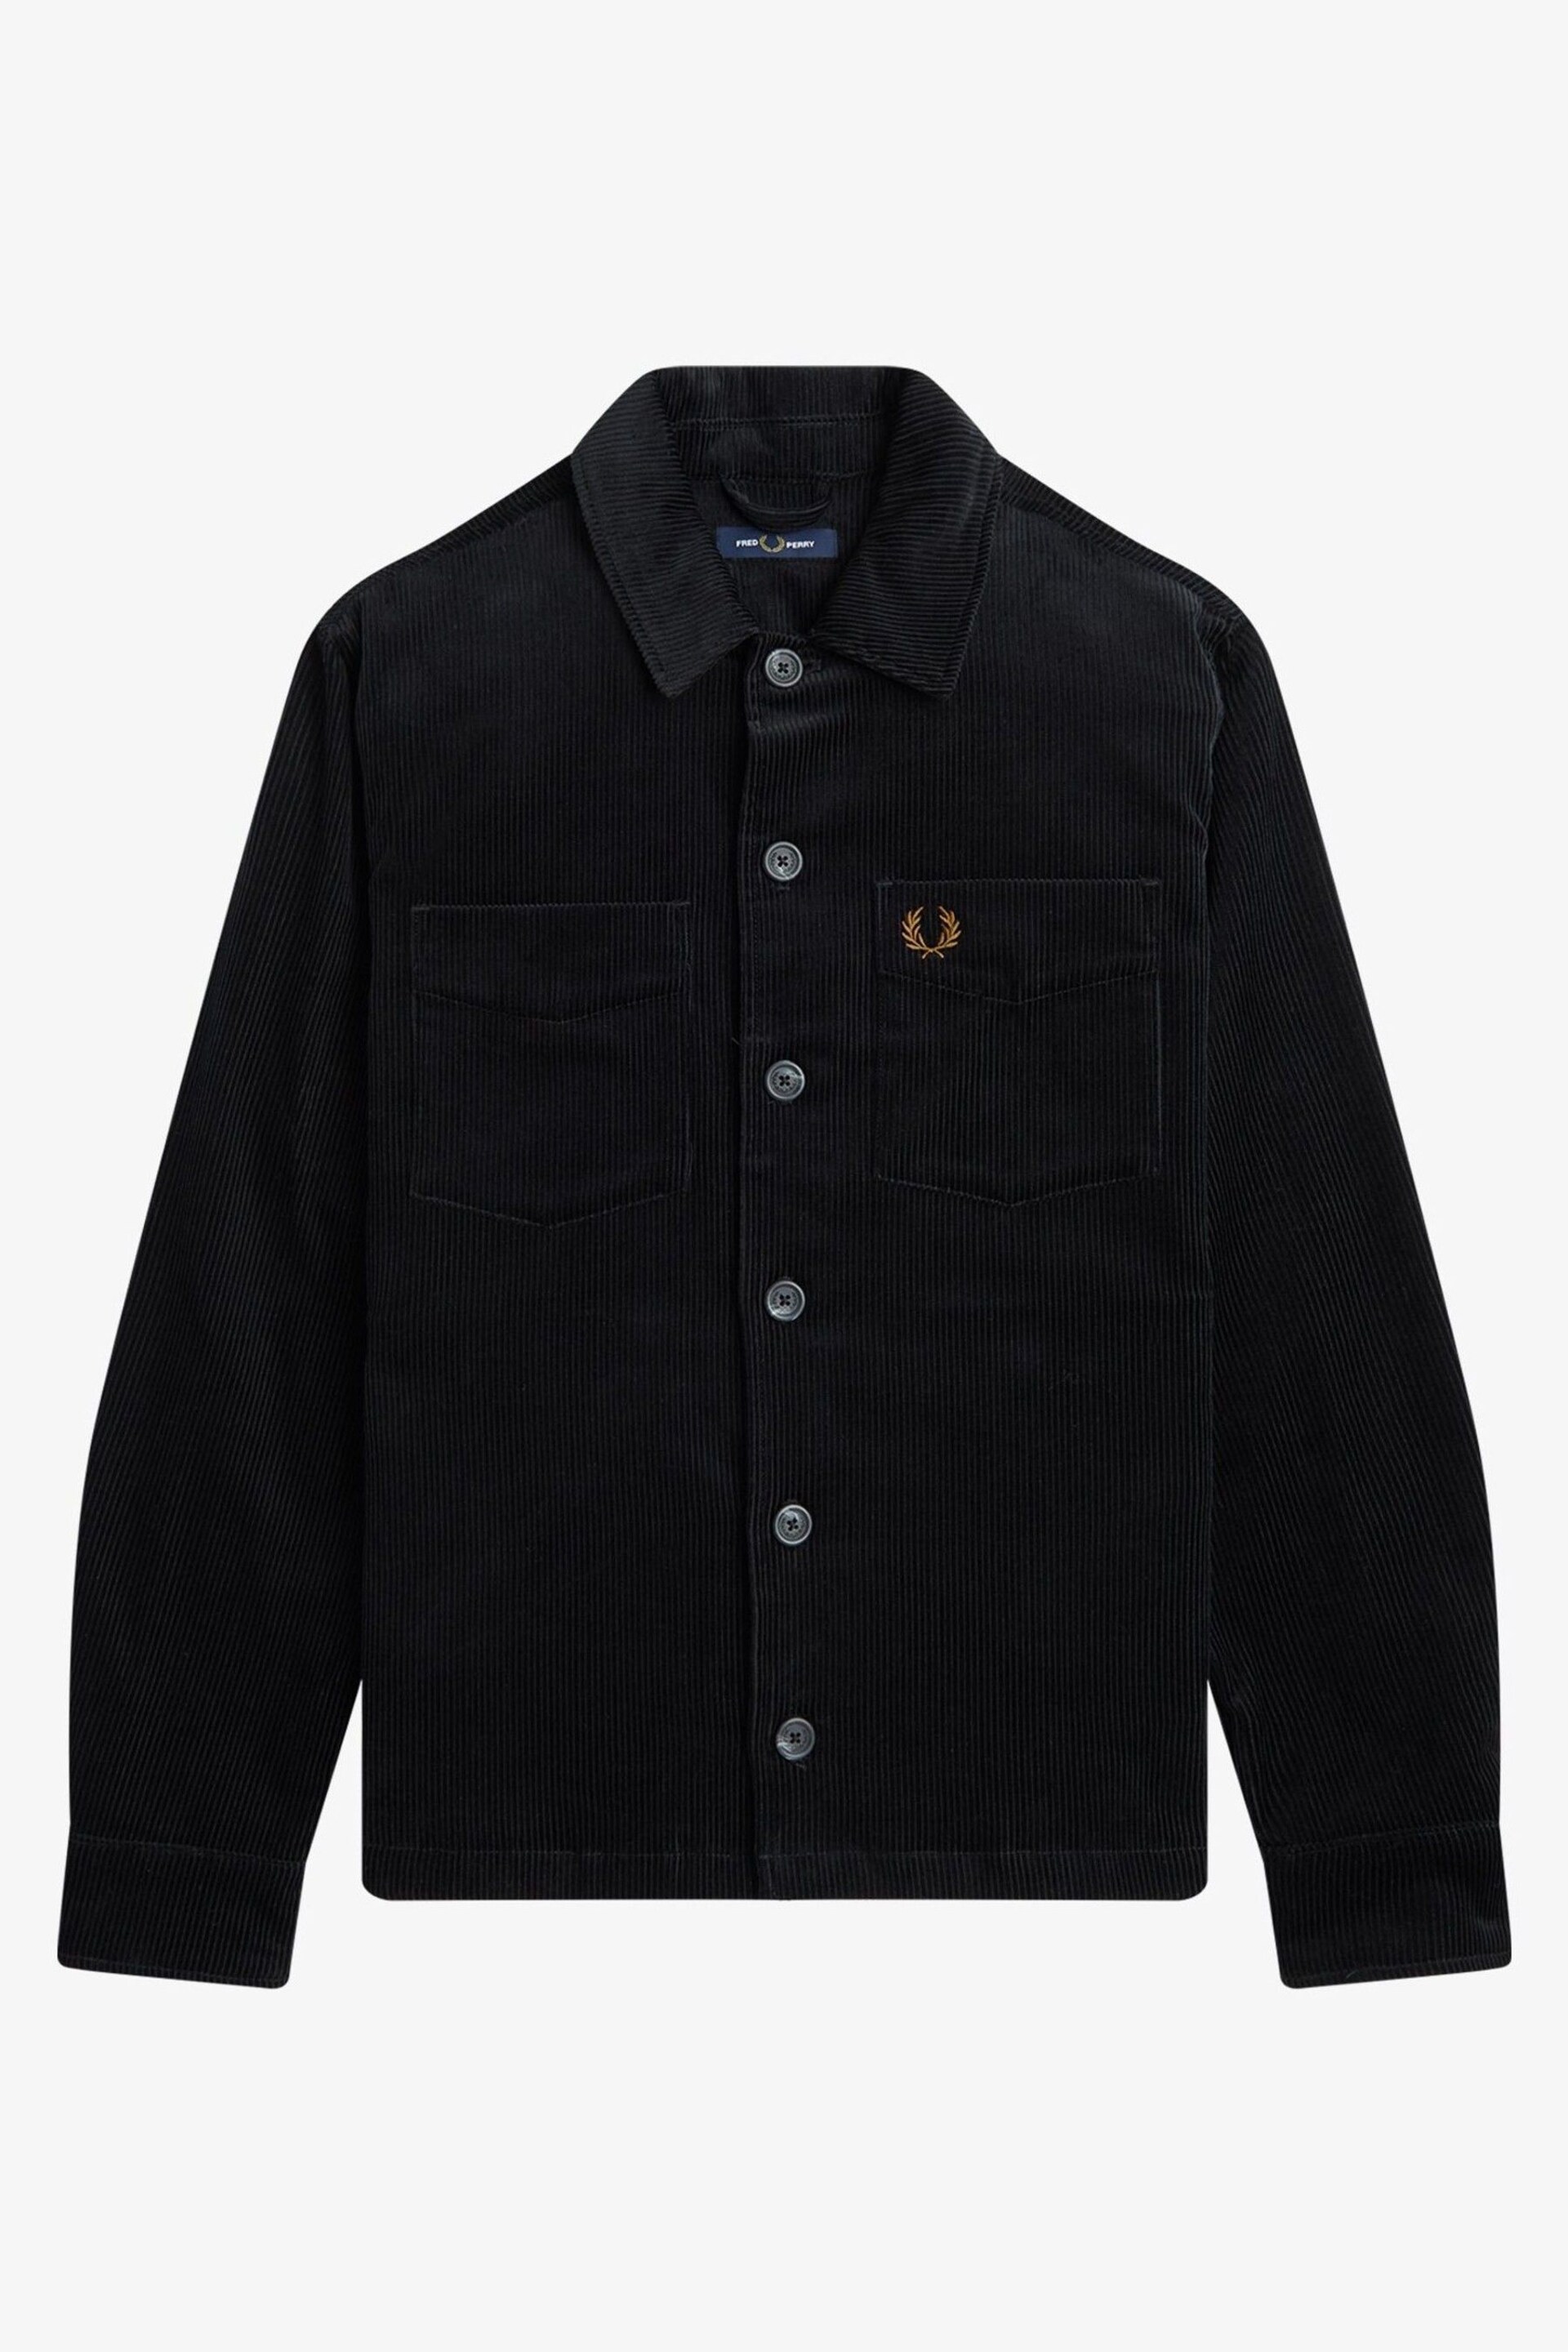 Fred Perry Cord Black Overshirt - Image 3 of 4